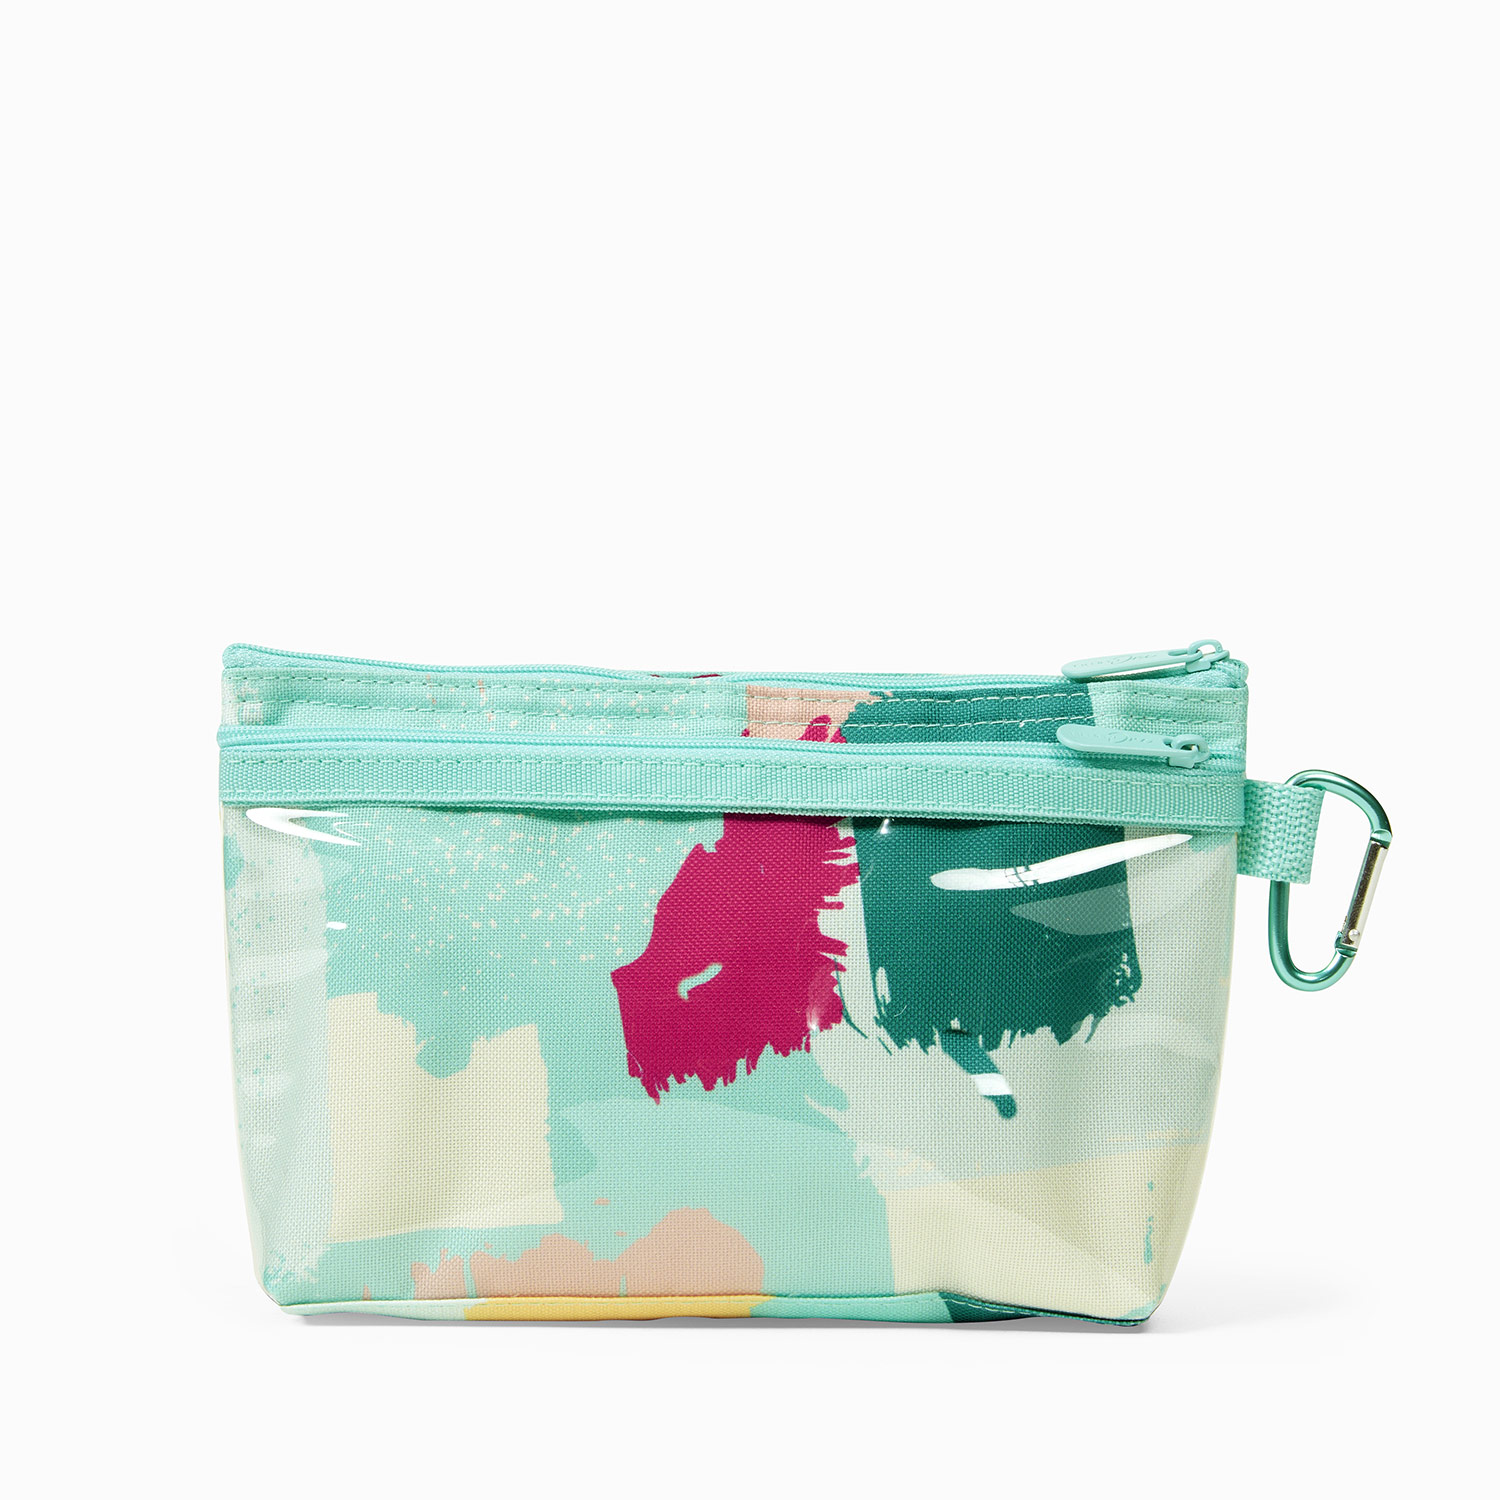 Clarity Pouch Small - Small Transparent Makeup Bag | Truffle